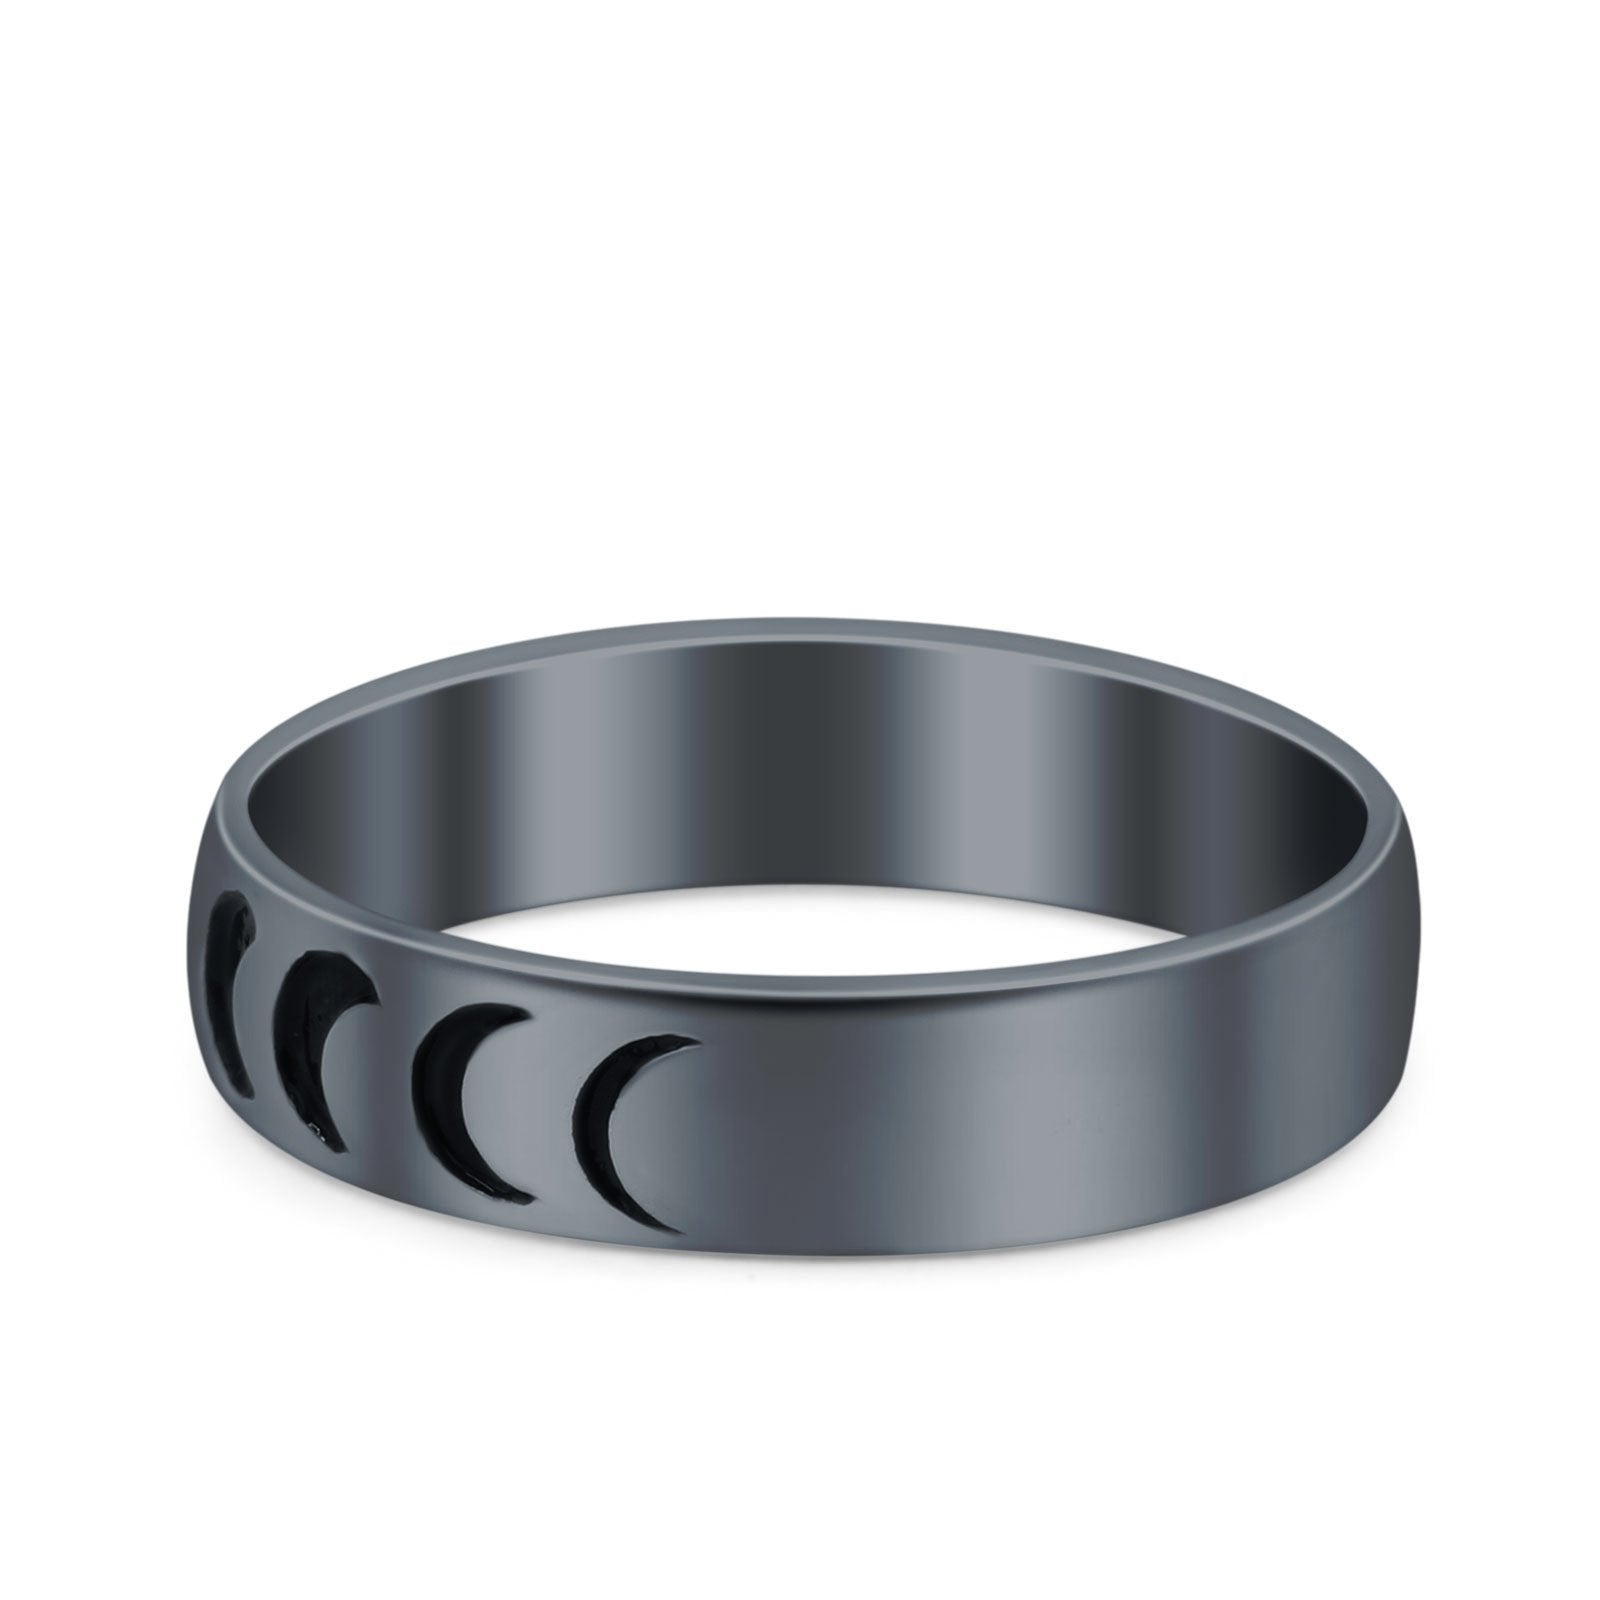 Moon Phases Band Oxidized Ring Solid 925 Sterling Silver (4mm)